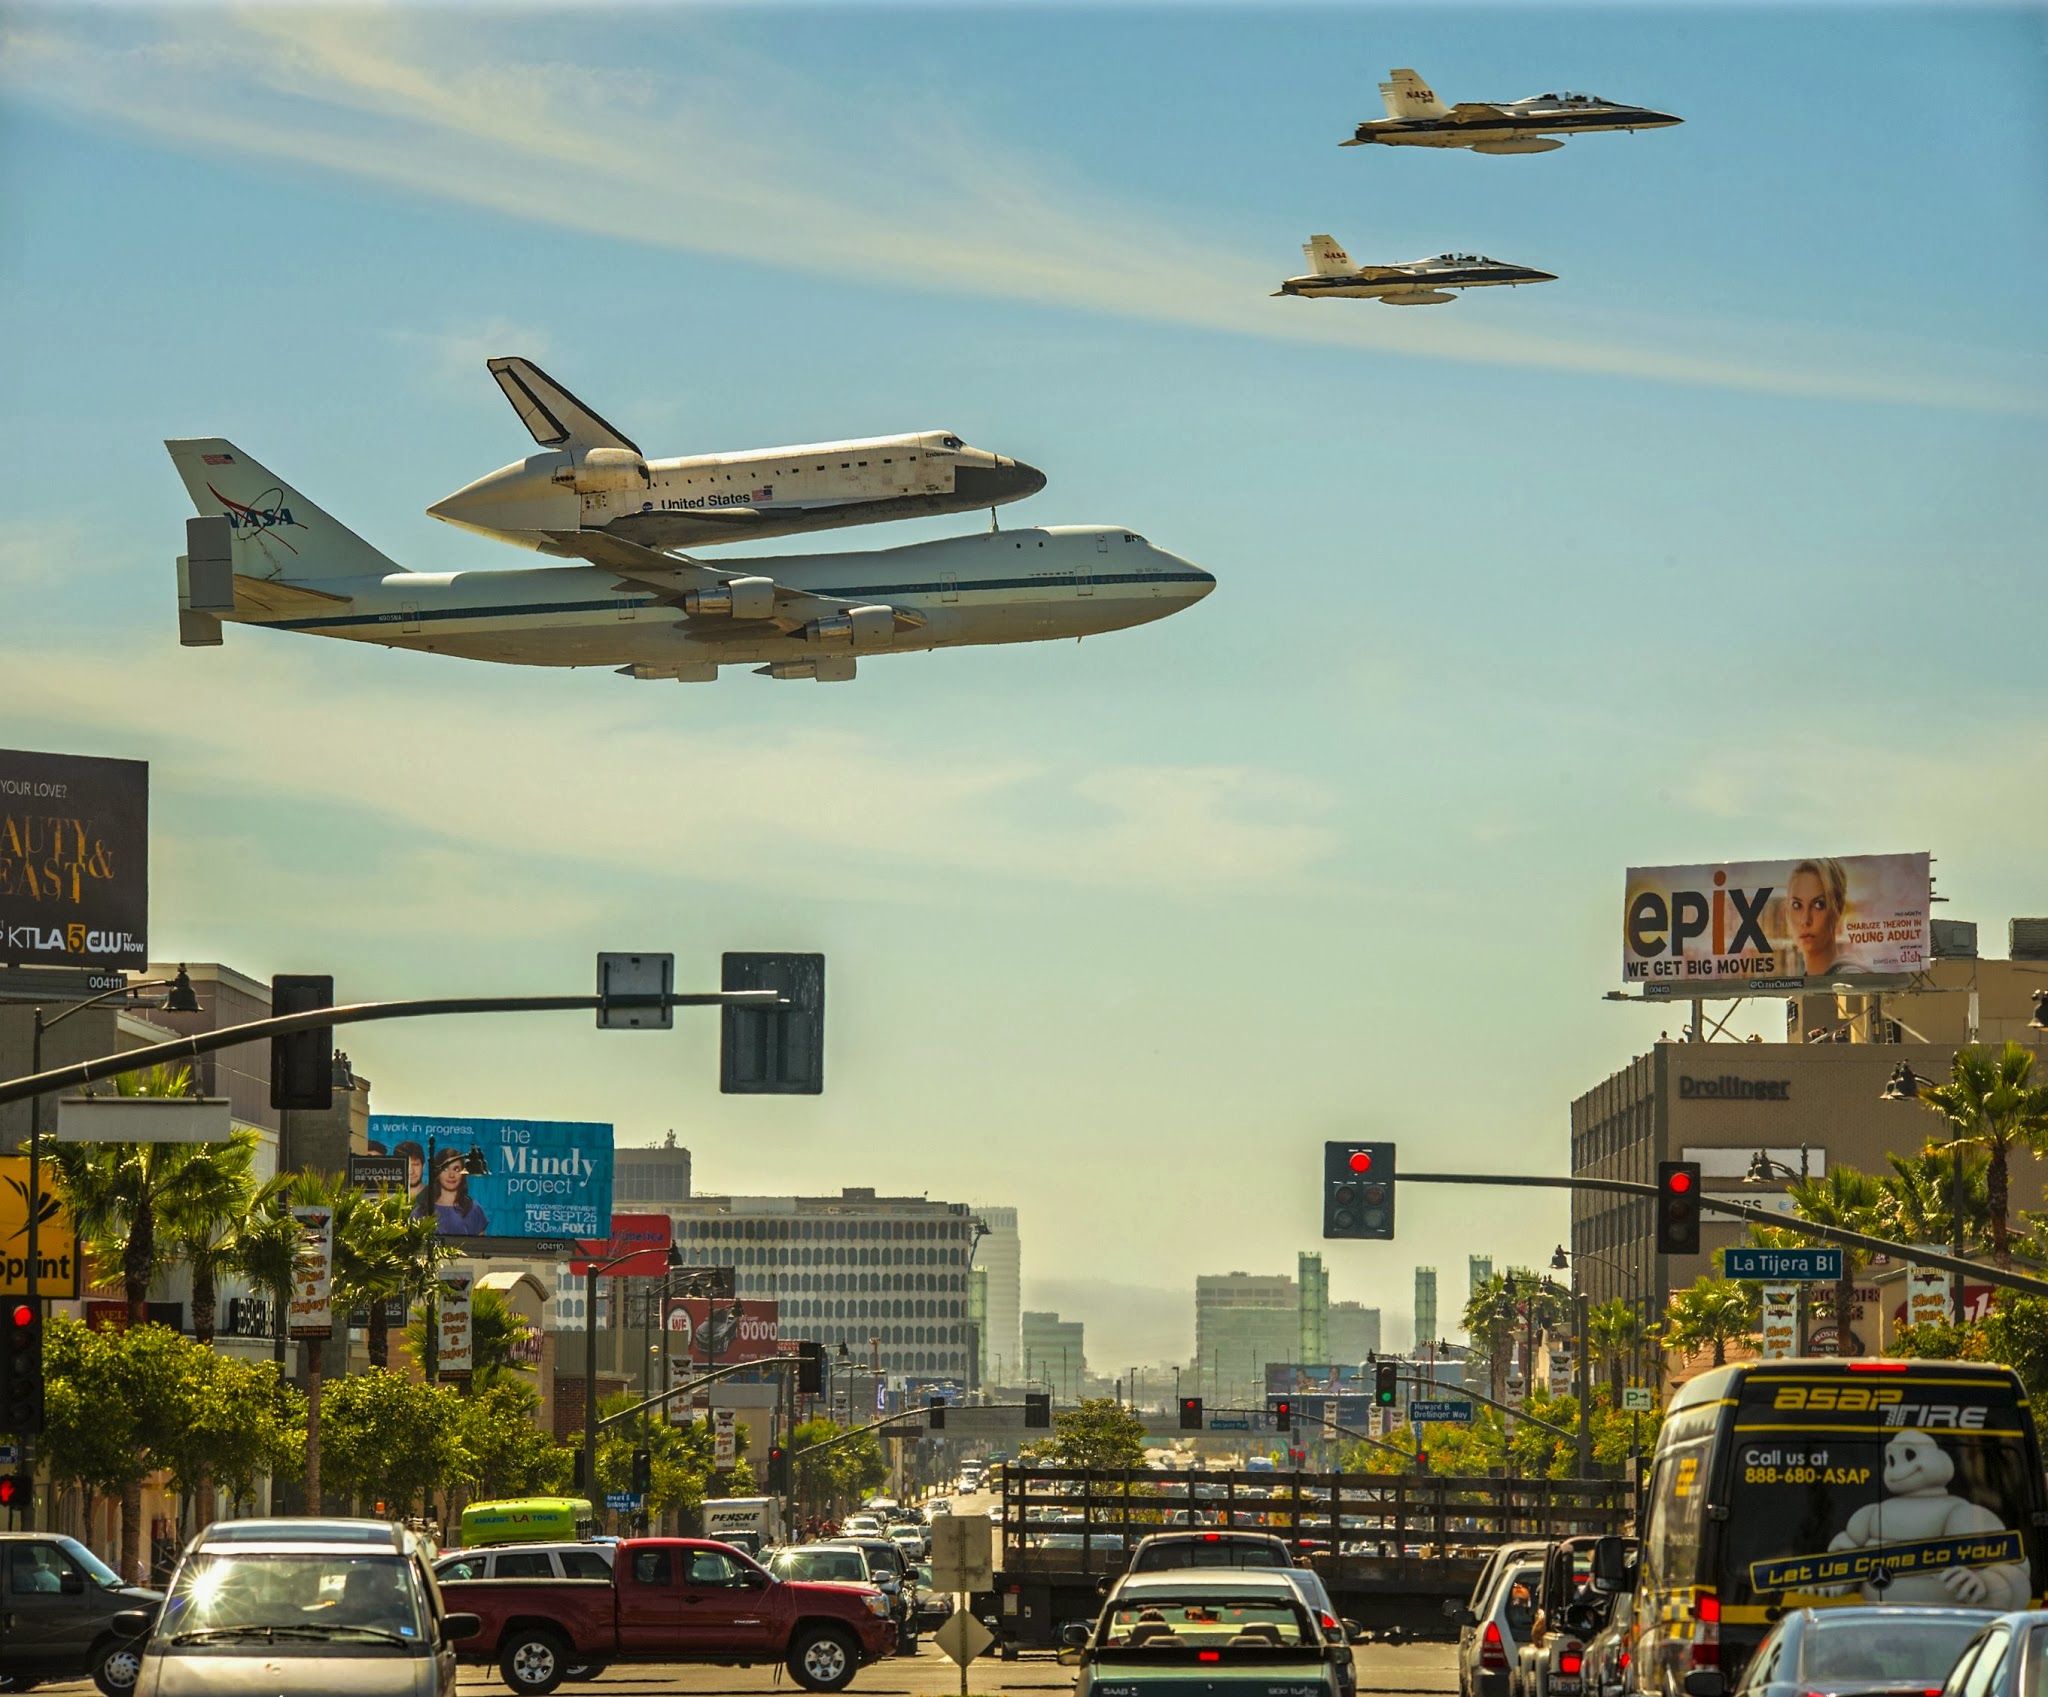 The space shuttle being carried by a 747 and escorted by two F-18’s… 

It can hold the fucking space shuttle but I get hit with extra baggage fees